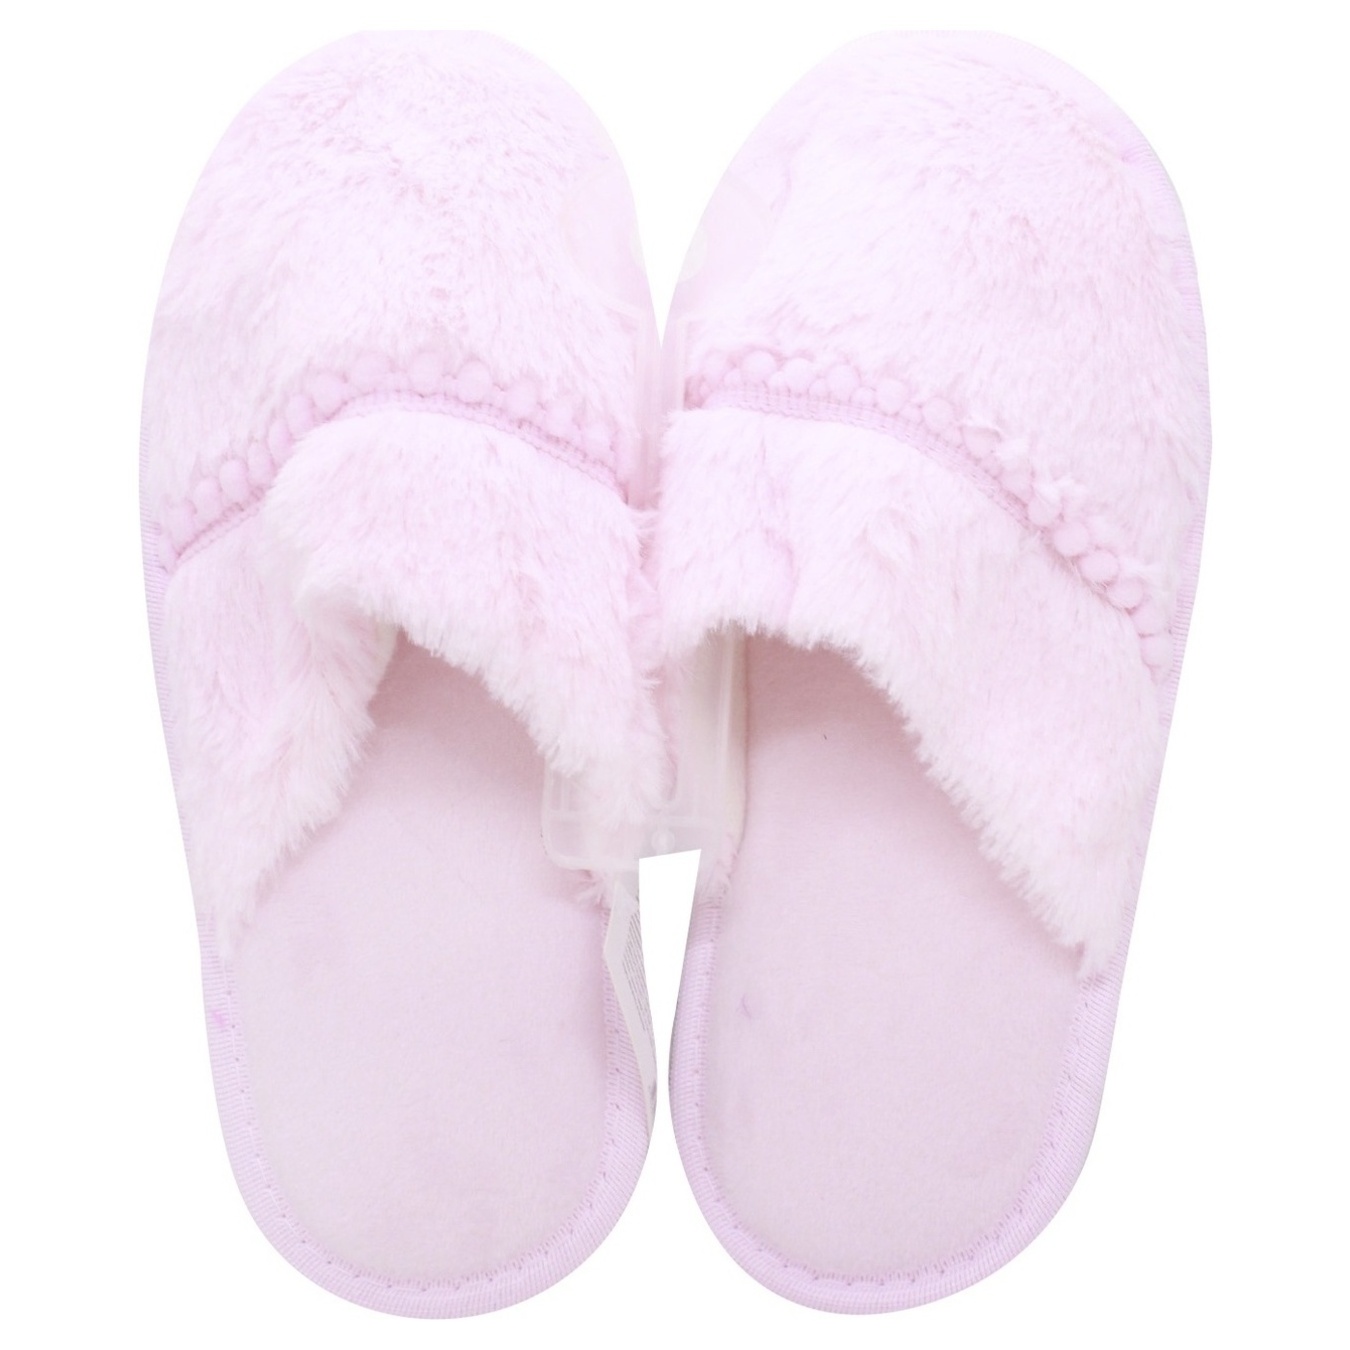 Aimon slippers for women in the pile assortment 2